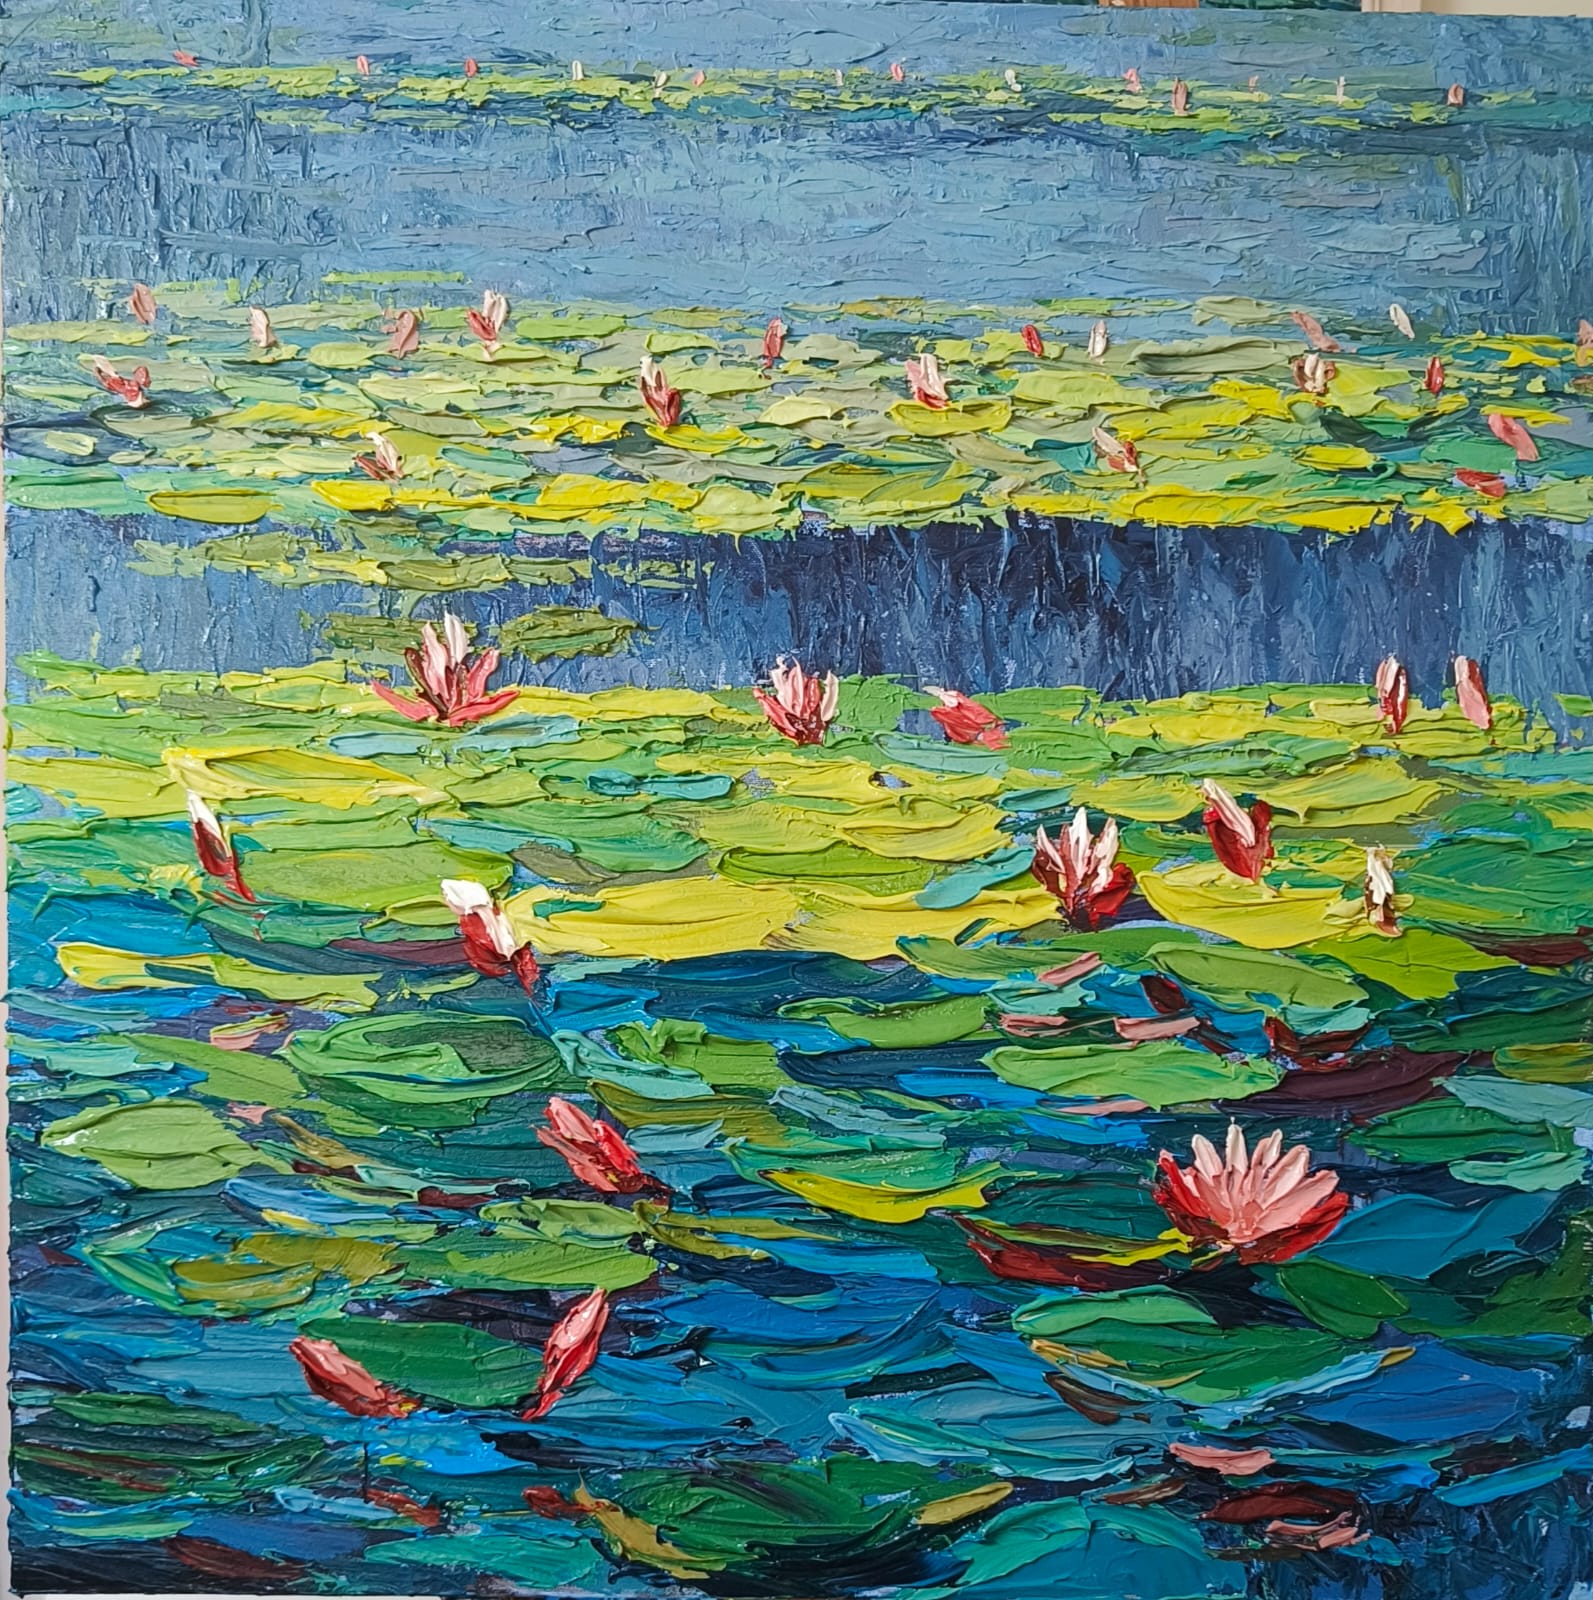 Figurative Painting with Acrylic on Canvas "Lotus (1260)" art by Ganesh Mhatre